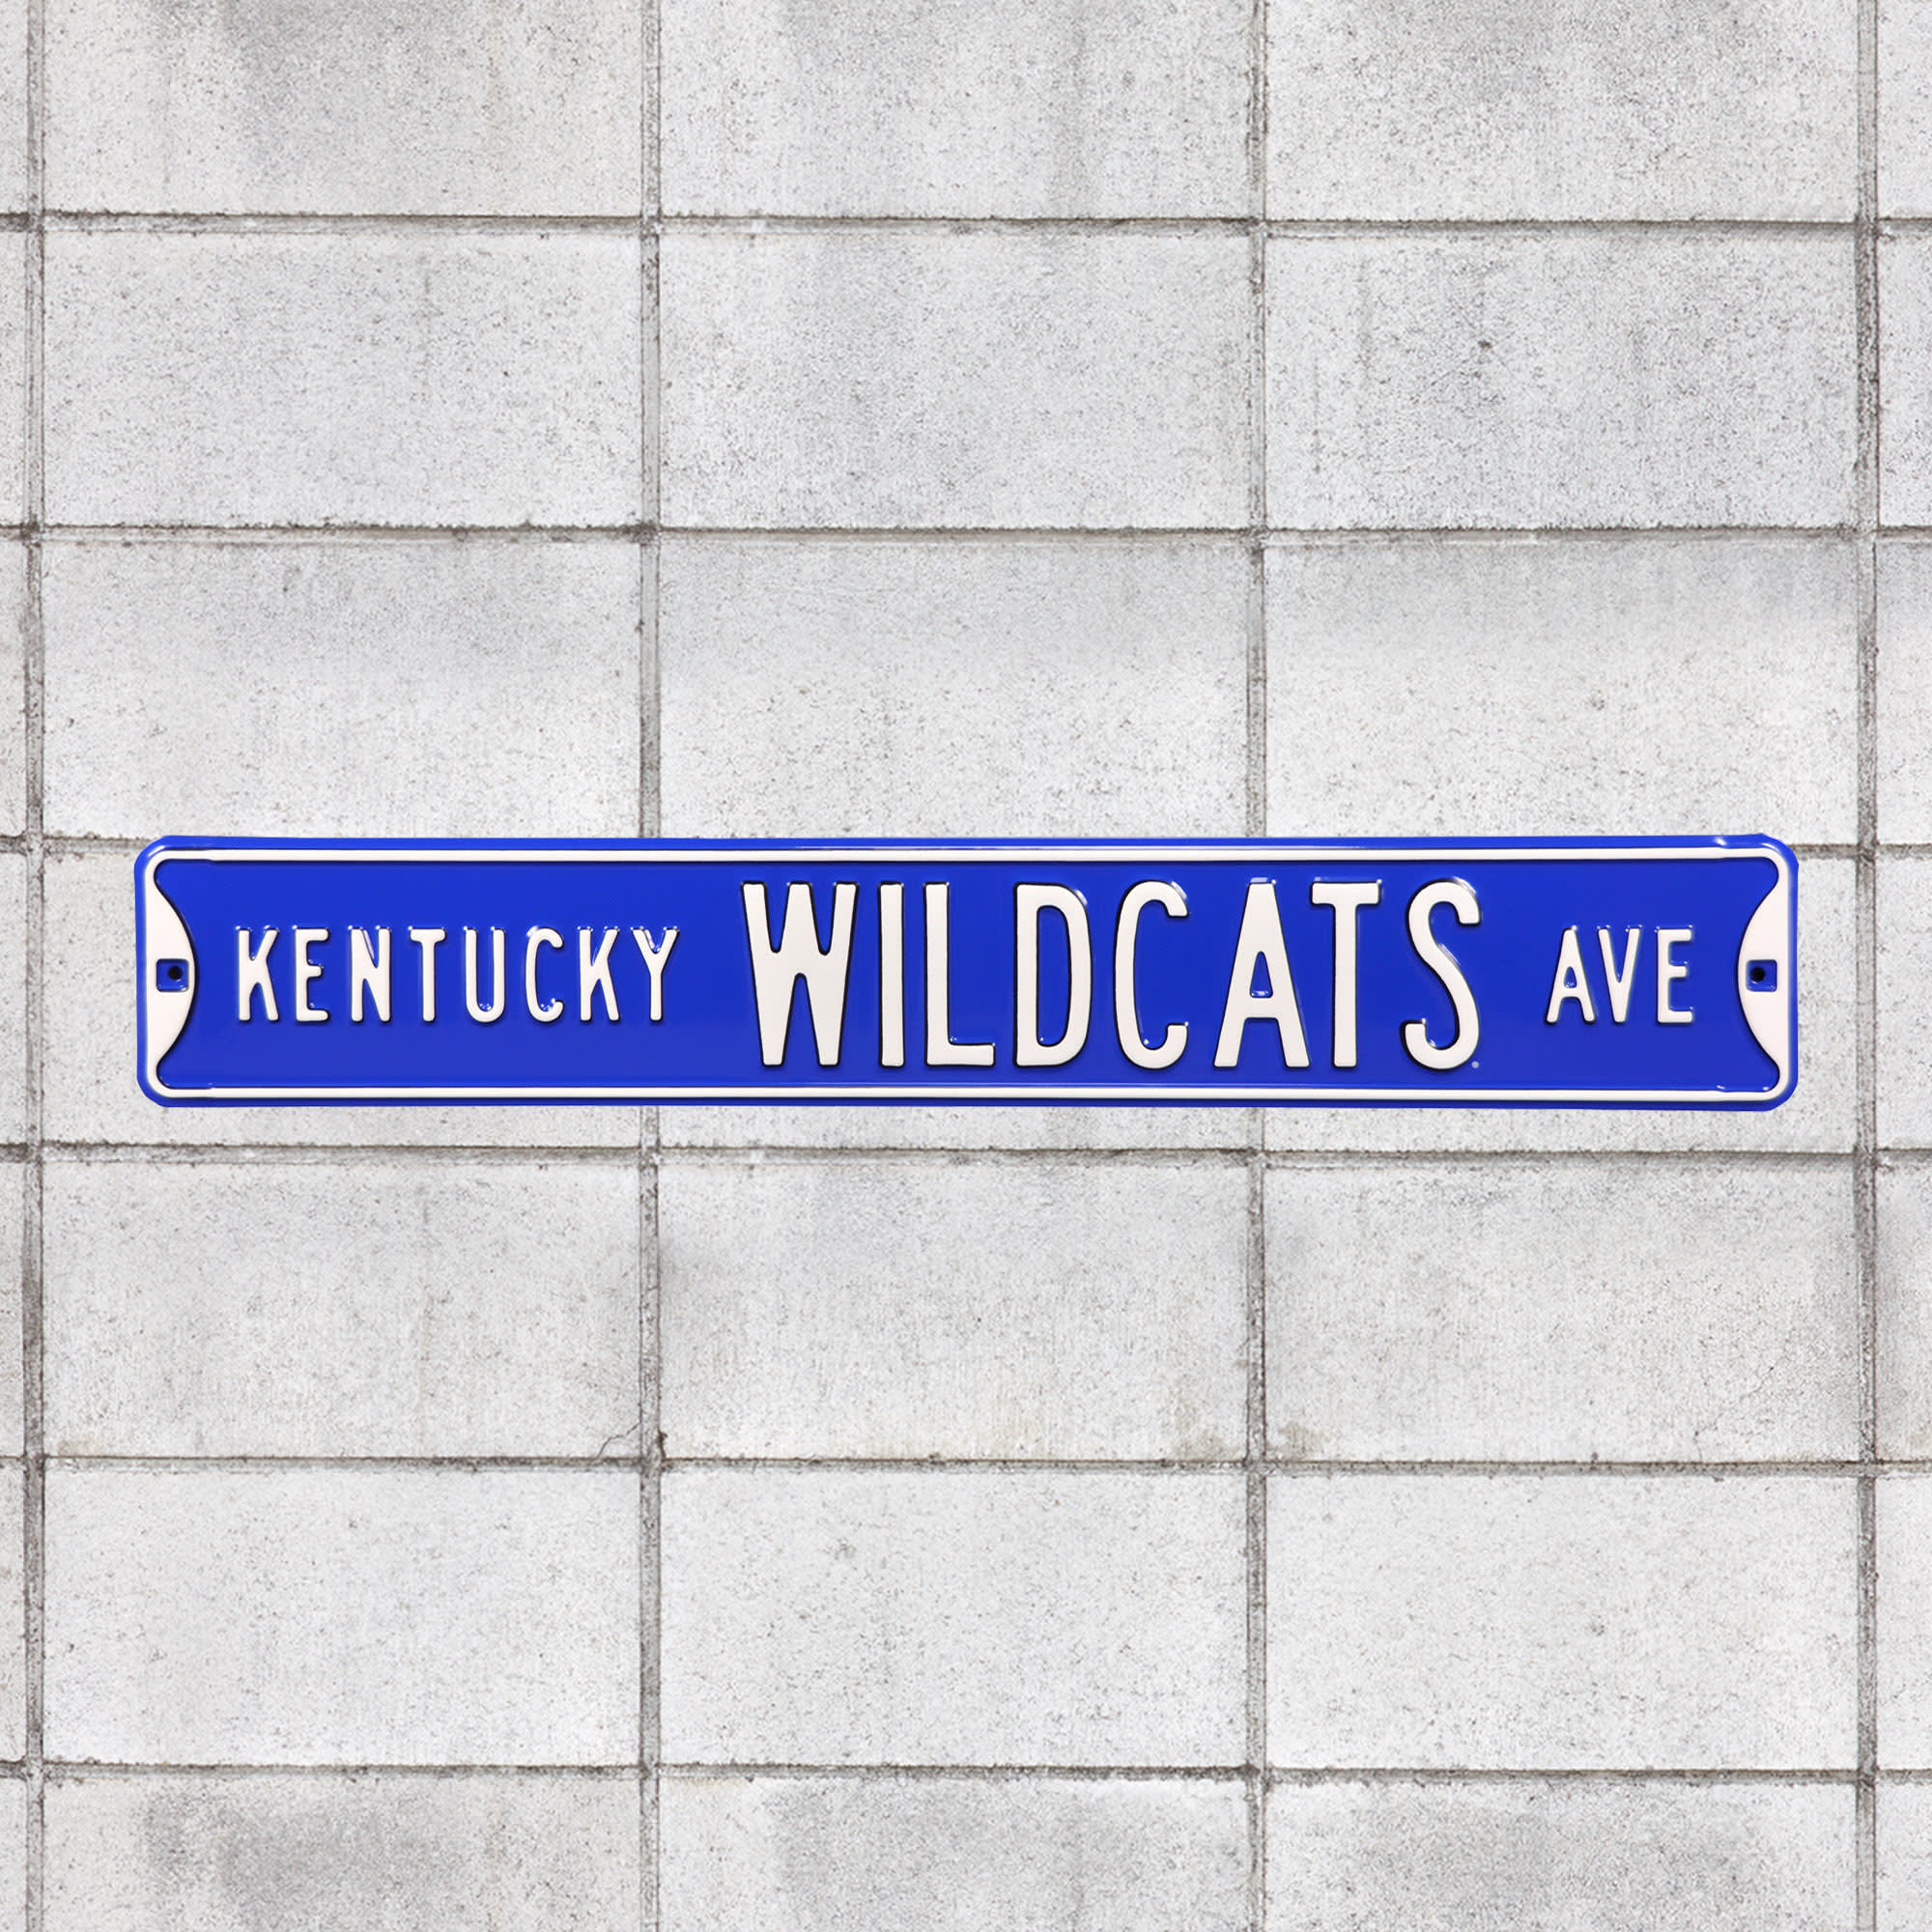 Kentucky Wildcats: Kentucky Wildcats Avenue - Officially Licensed Metal Street Sign 36.0"W x 6.0"H by Fathead | 100% Steel